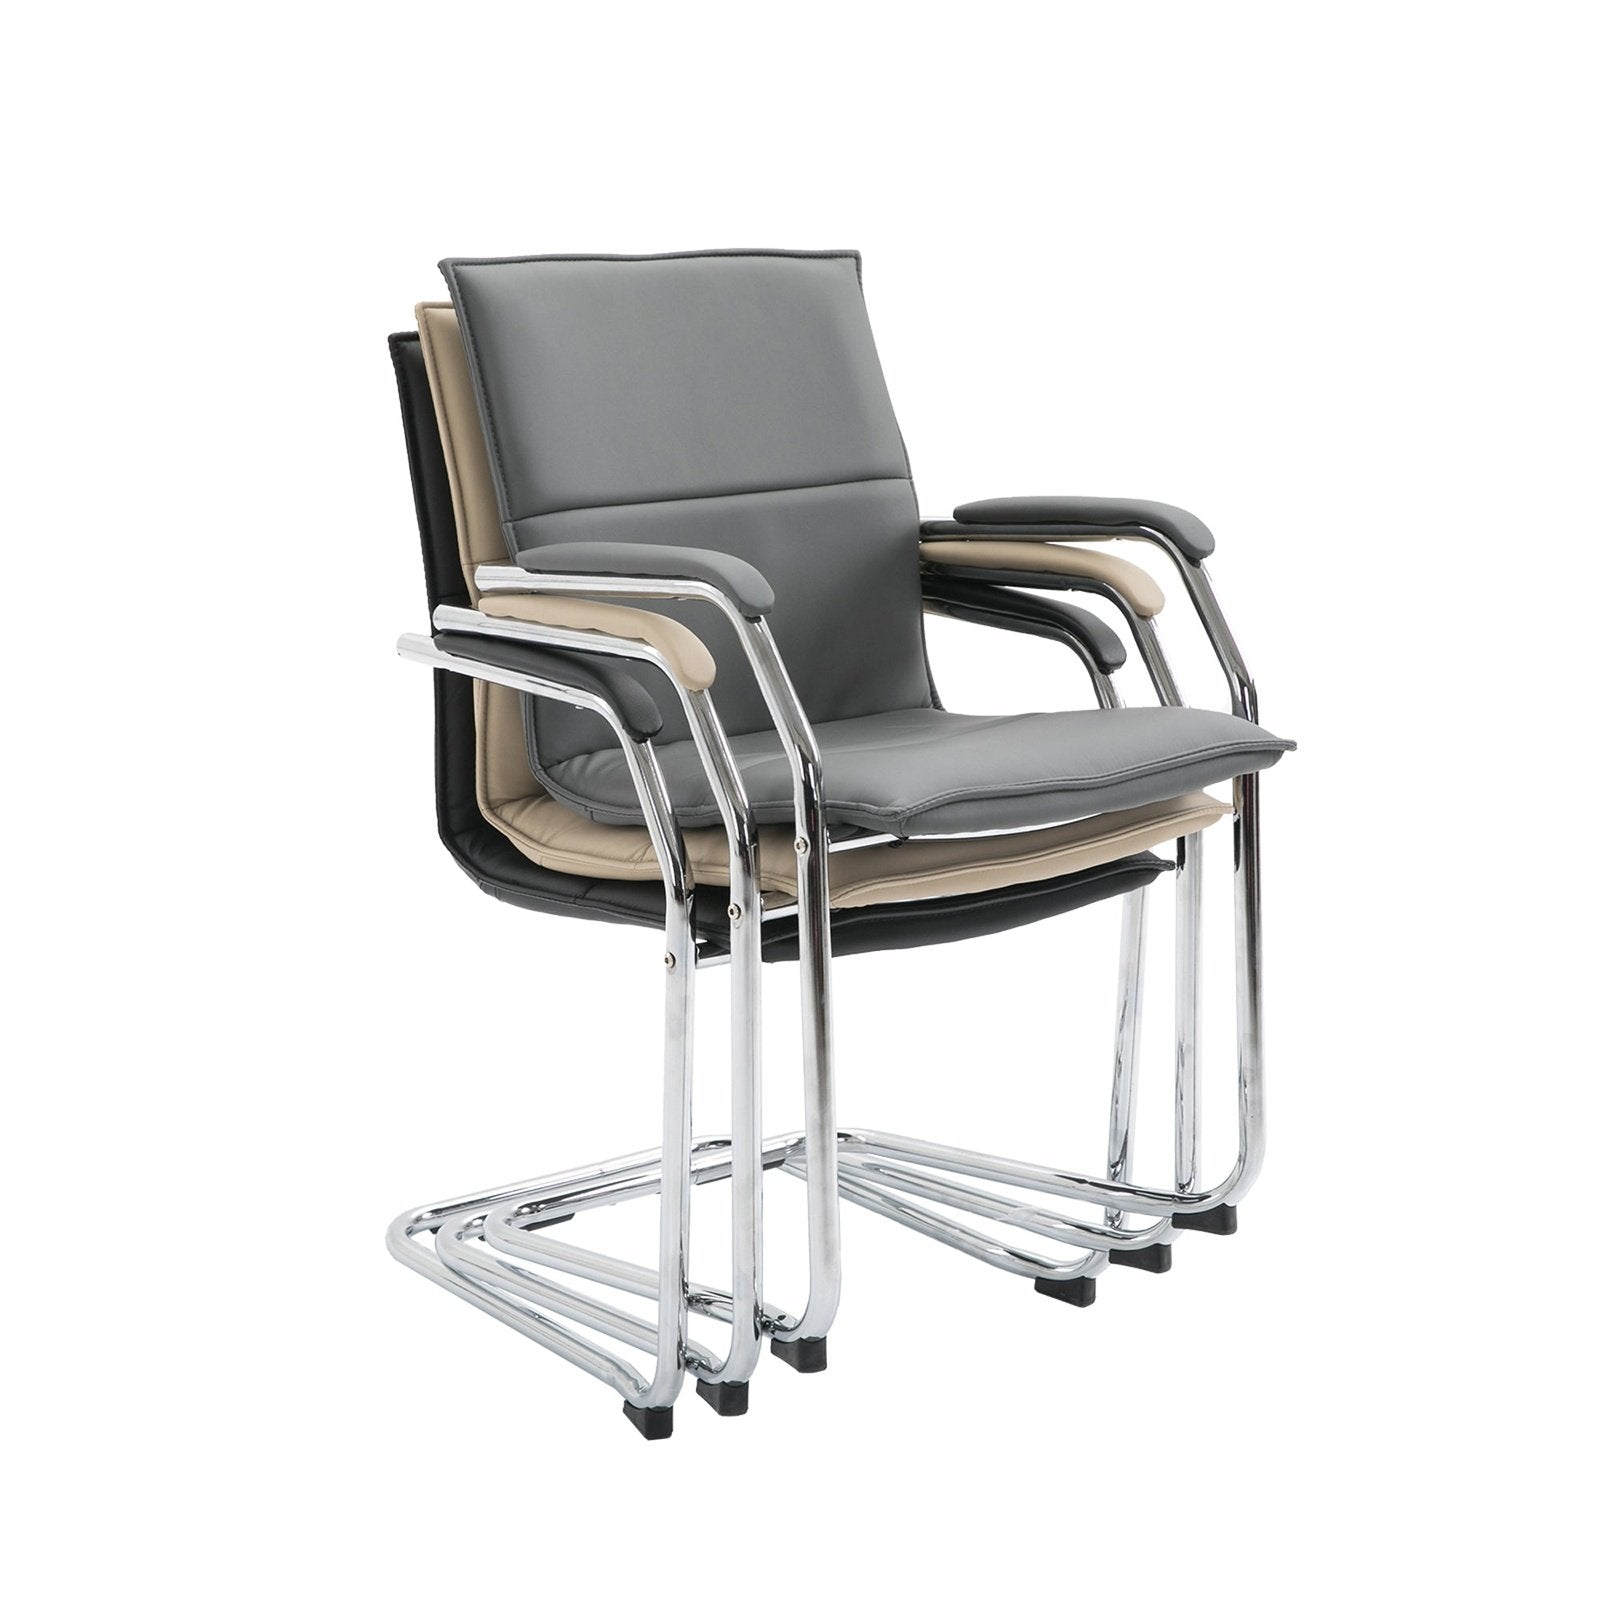 Essen stackable meeting room cantilever chair - Office Products Online